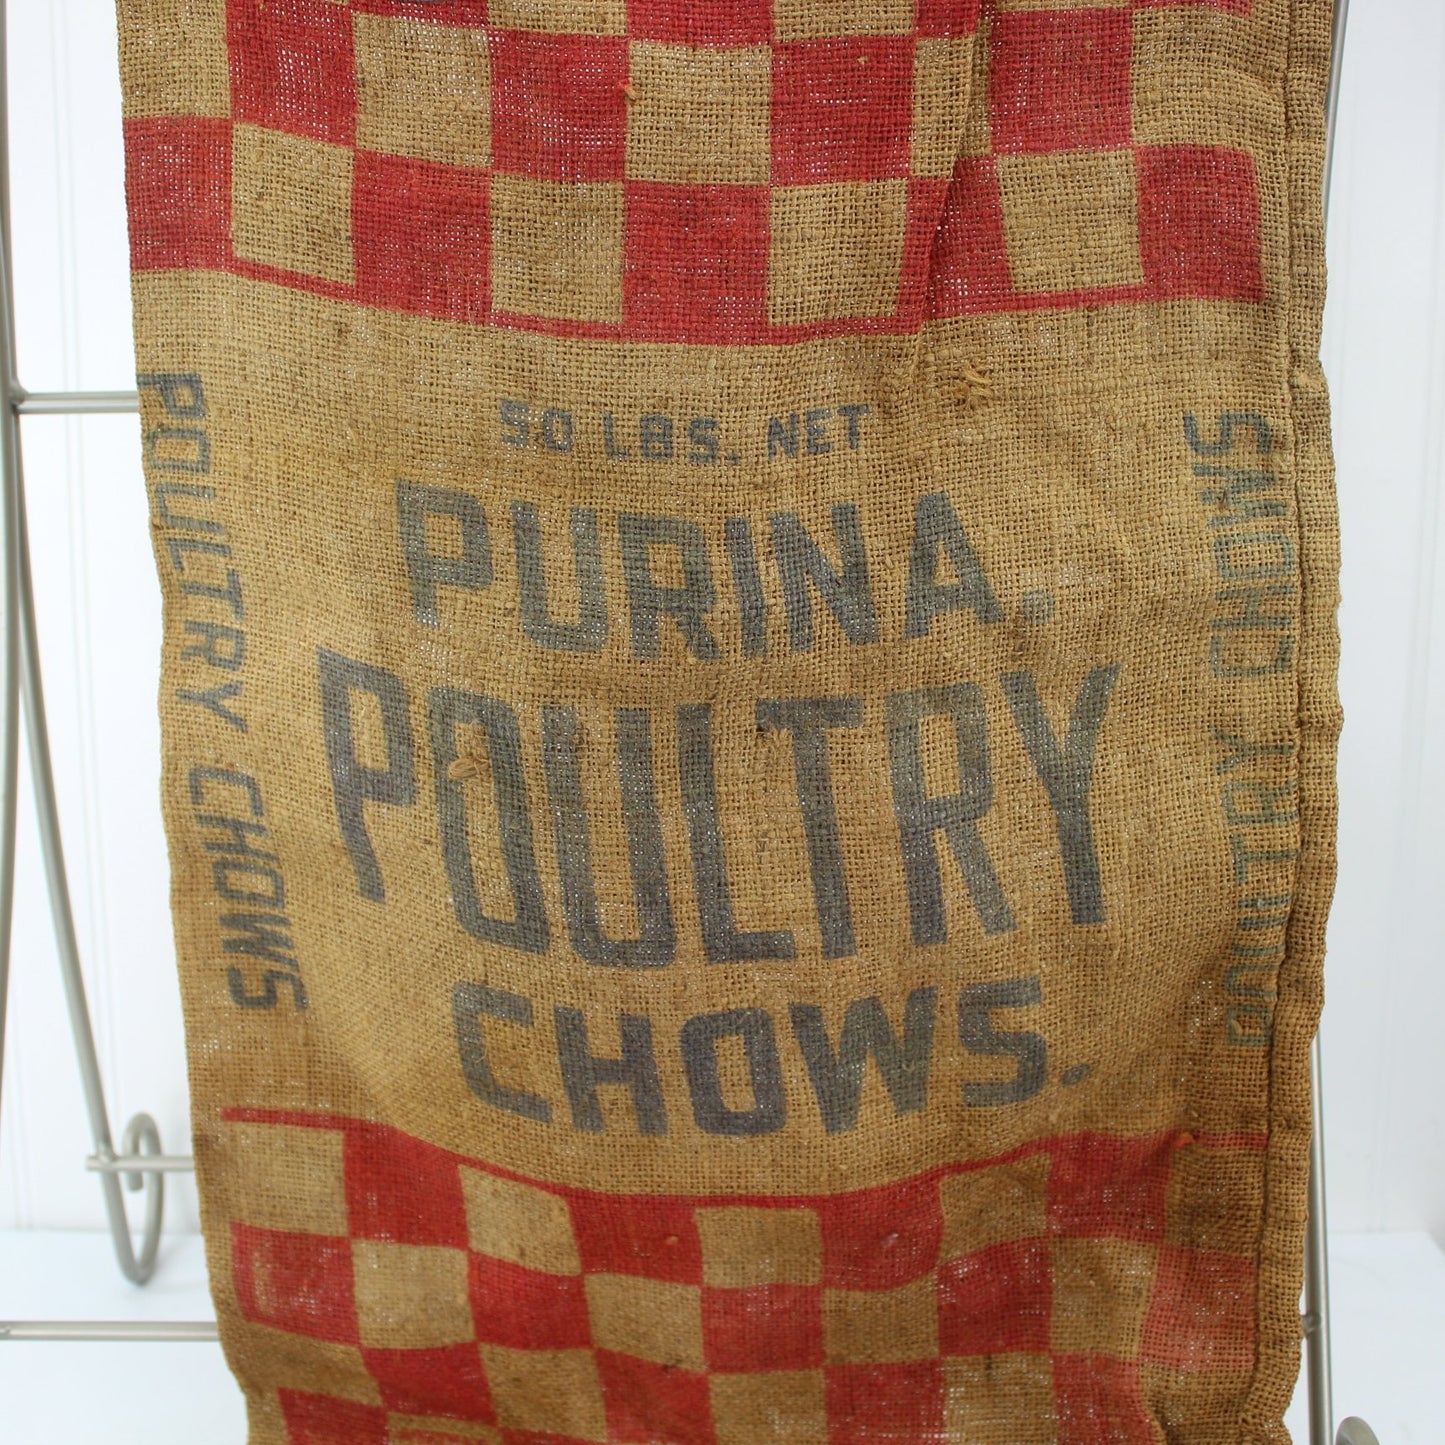 Purina Vintage Poultry Chows Burlap Feed Bag 50# Size front center bag